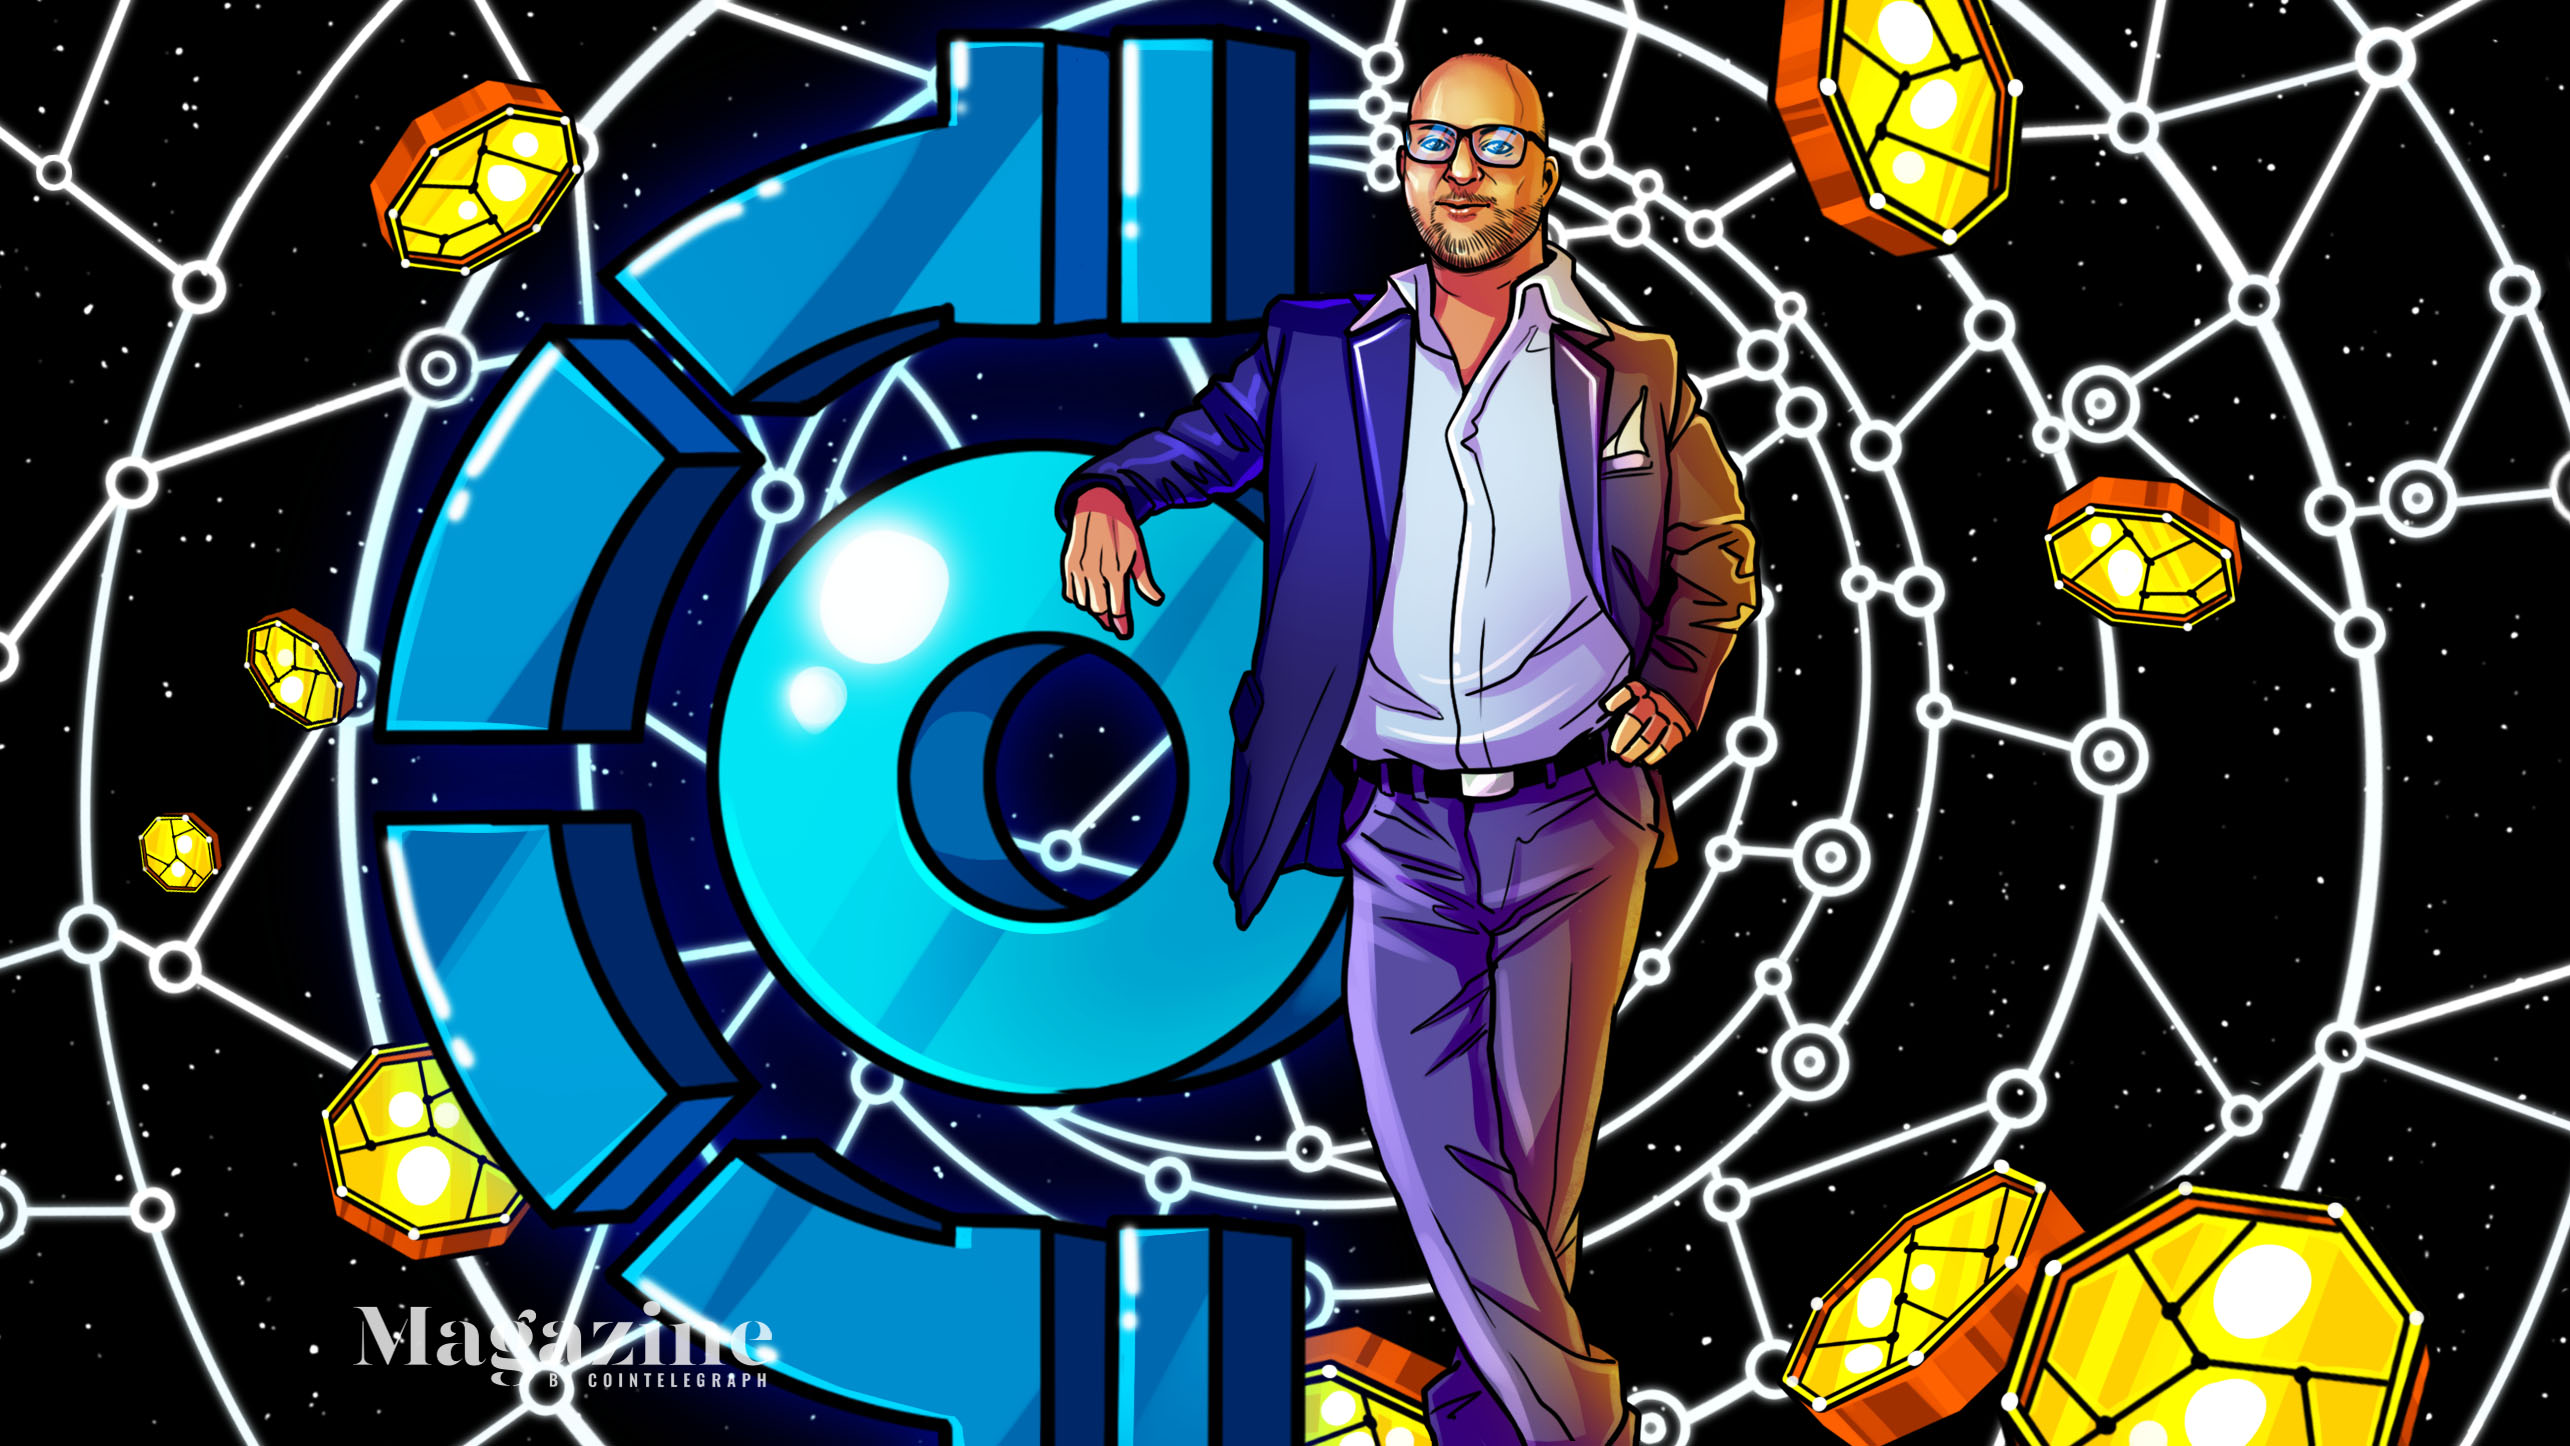 Ralf Glabischnig on Crypto Valley and the Crypto Oasis – Cointelegraph Magazine